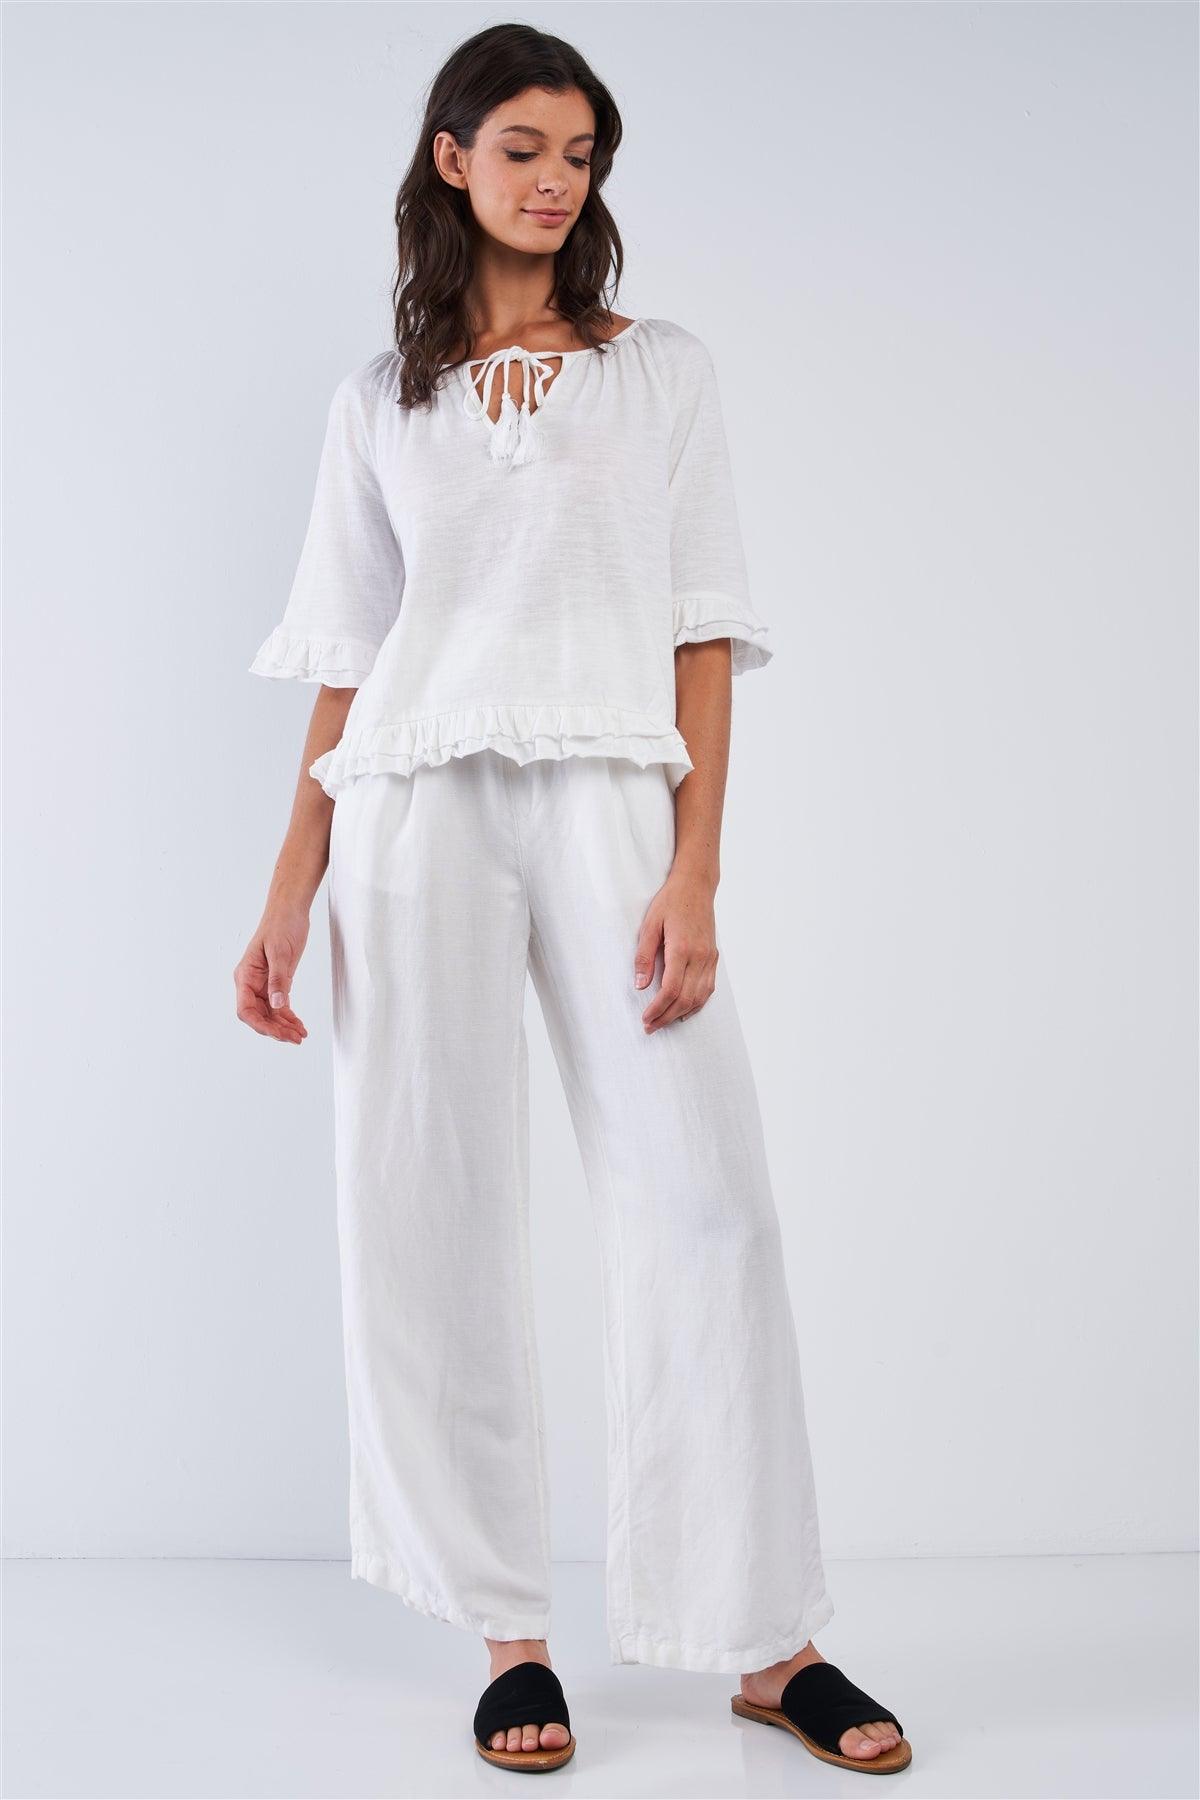 Solid White Cotton Loose Fit Mid Sleeve Ruffle Hem Country Style Peasant Top